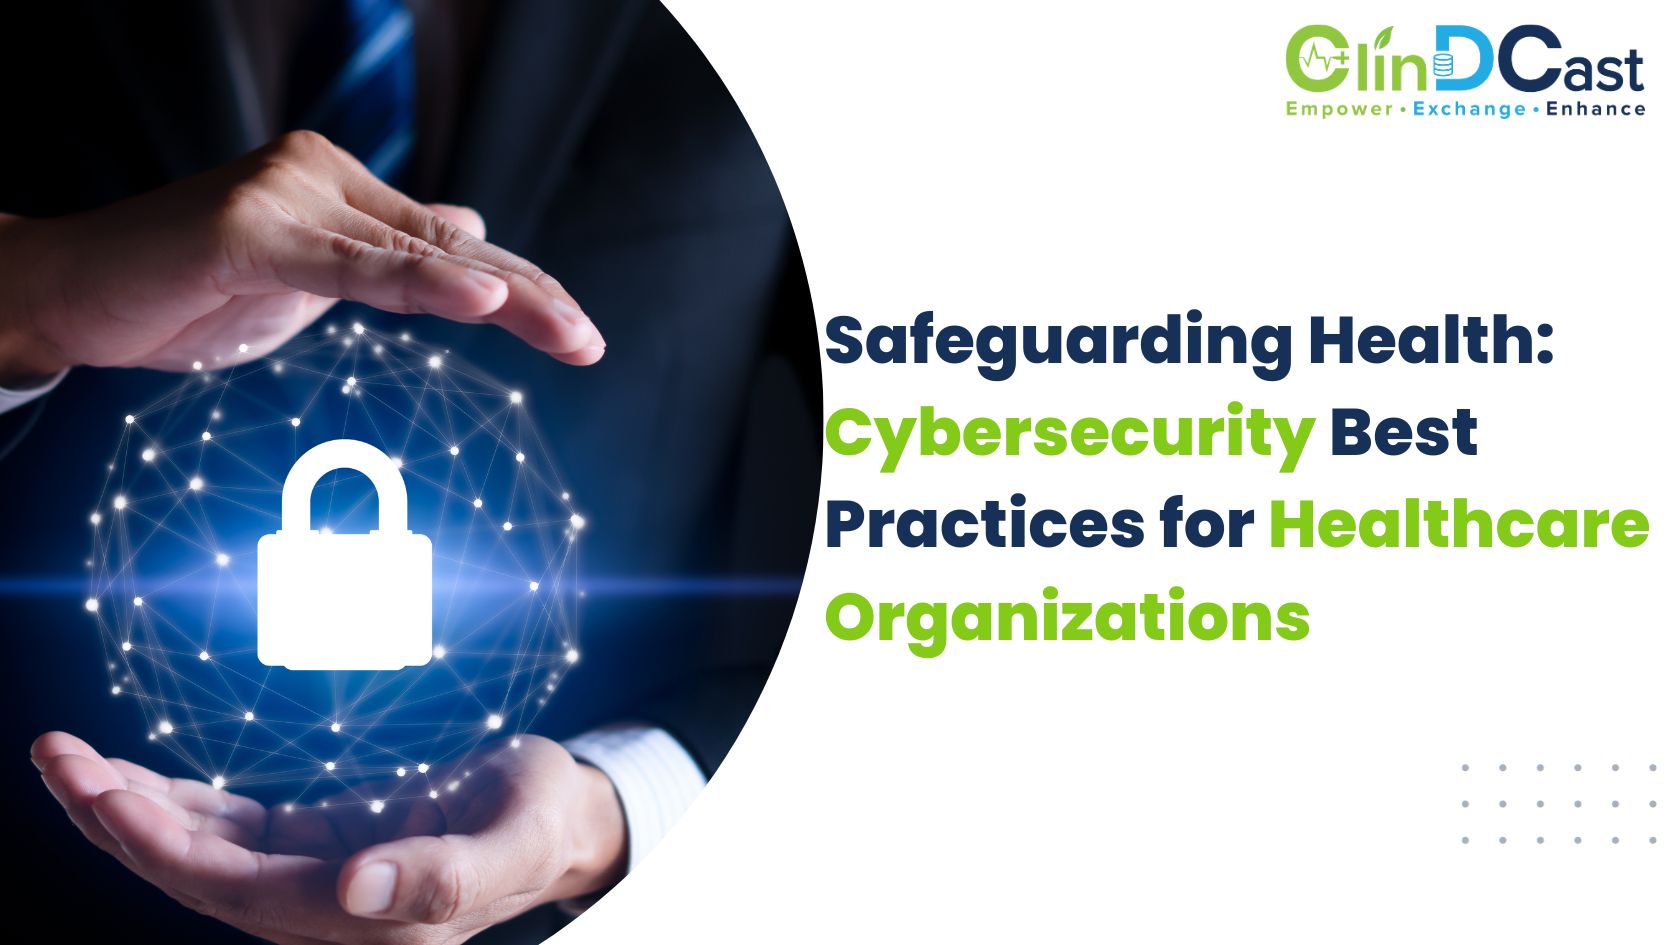 Safeguarding Health: Cybersecurity Best Practices for Healthcare Organizations